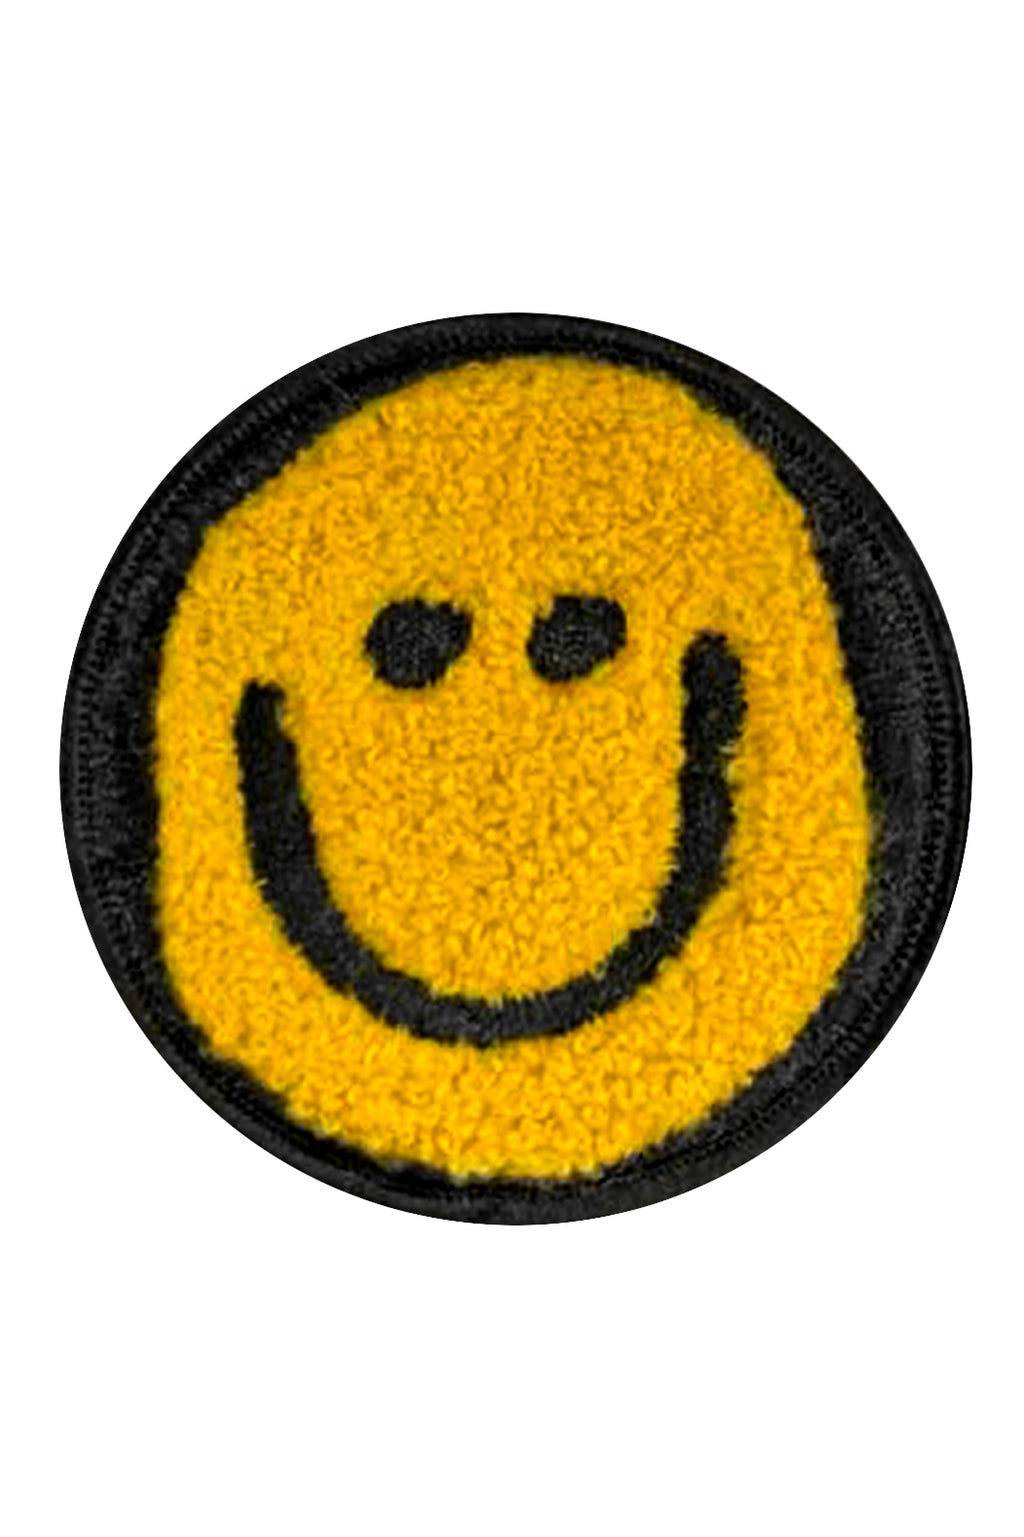 Step 2: Pick A Patch - Smiley Faces